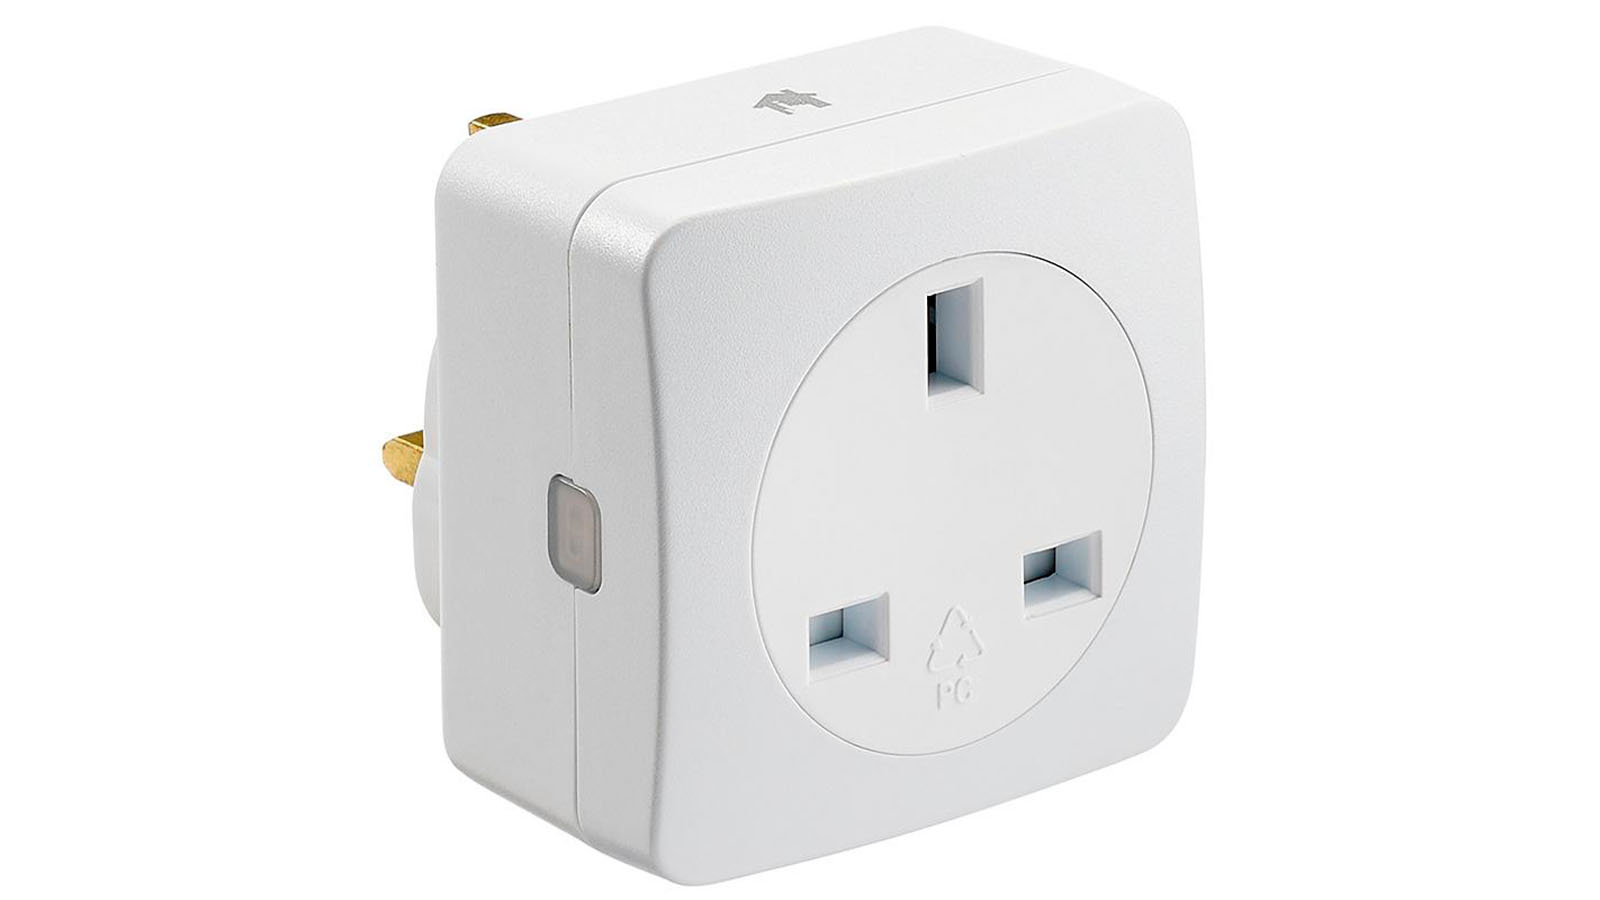 Energenie MiHome Wi-Fi Smart Plug - Supports 13 amp devices